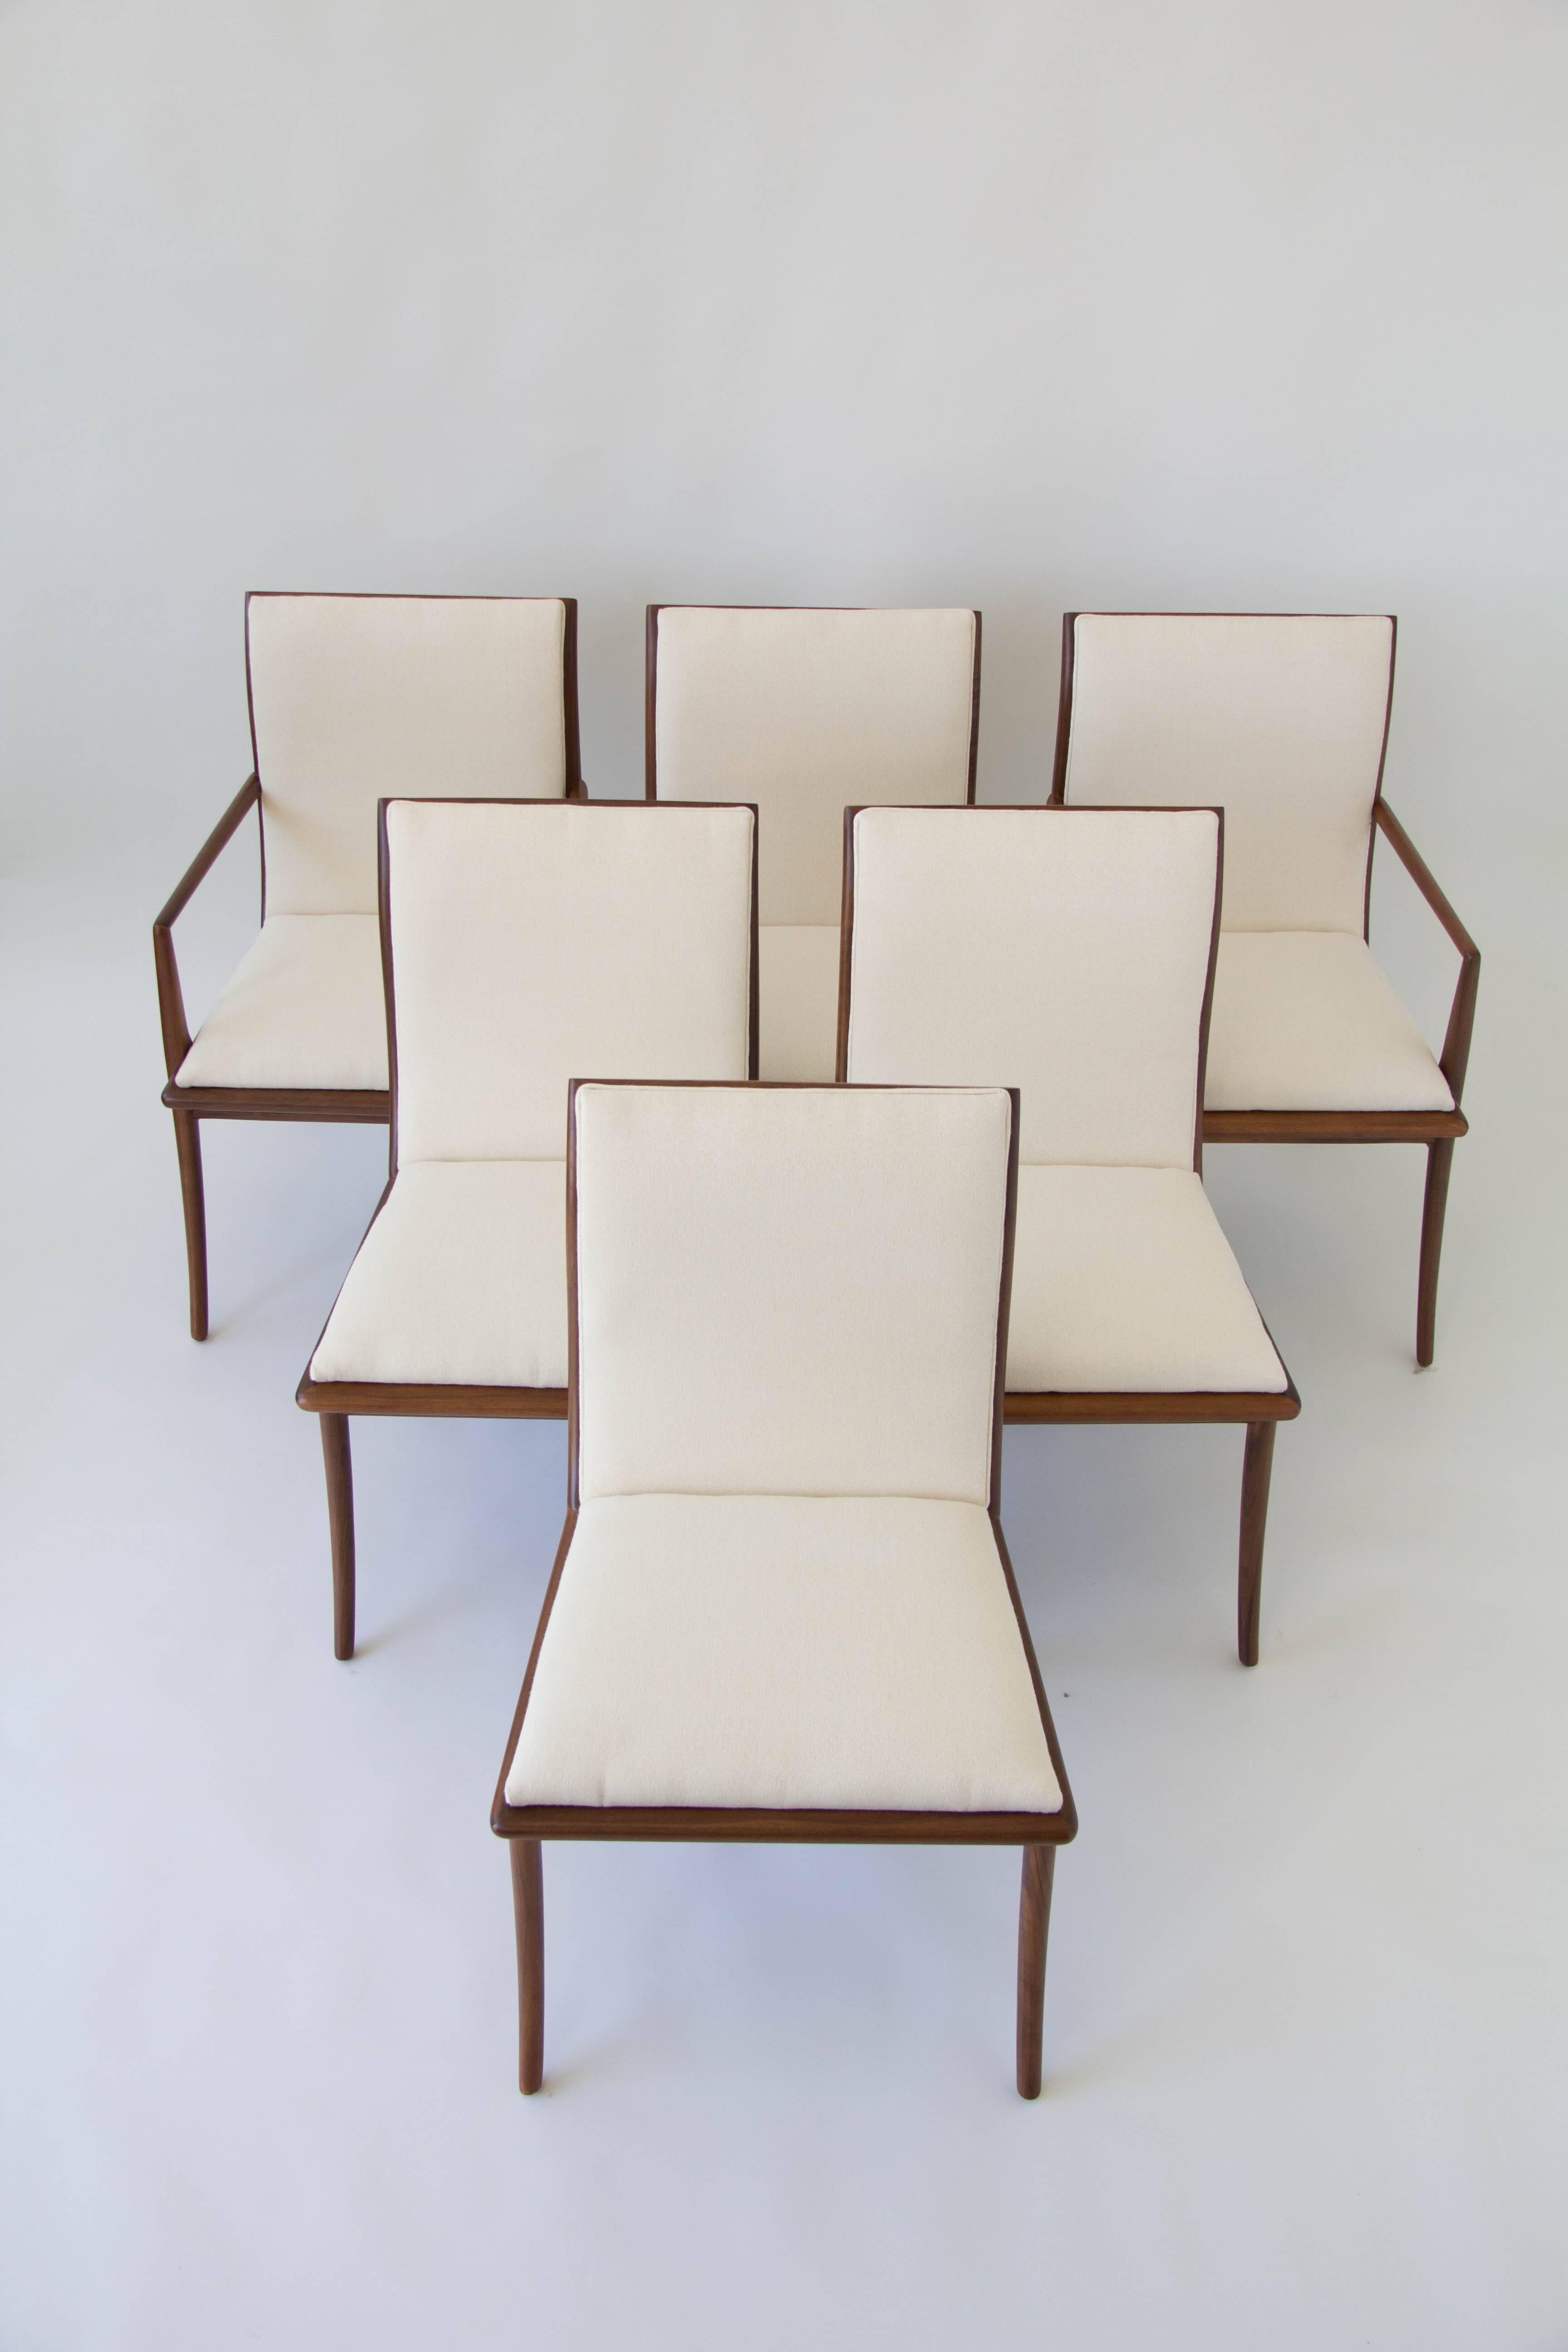 American-made dining set by T.H. Robsjohn-Gibbings for Widdicomb consists of six chairs, two armchairs and four side chairs. The chairs have a sabre-leg design with sculptural backs. New upholstered in a slightly textured off-white cloth that shows